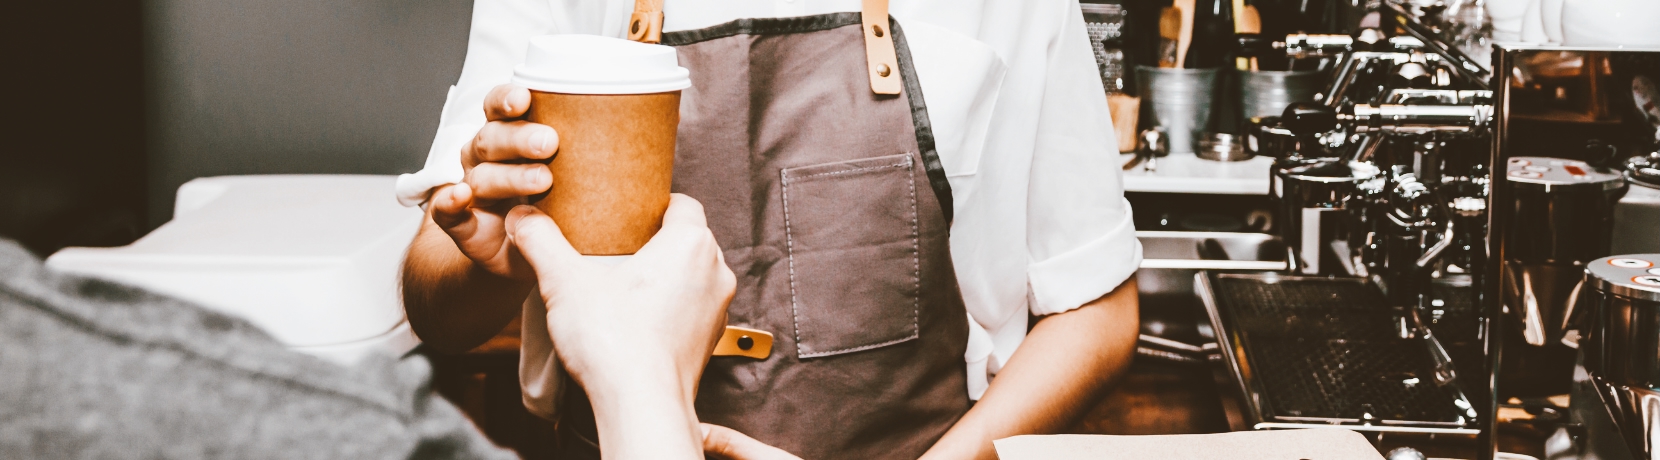 An image of a barista handing a cup of coffee to a customer.